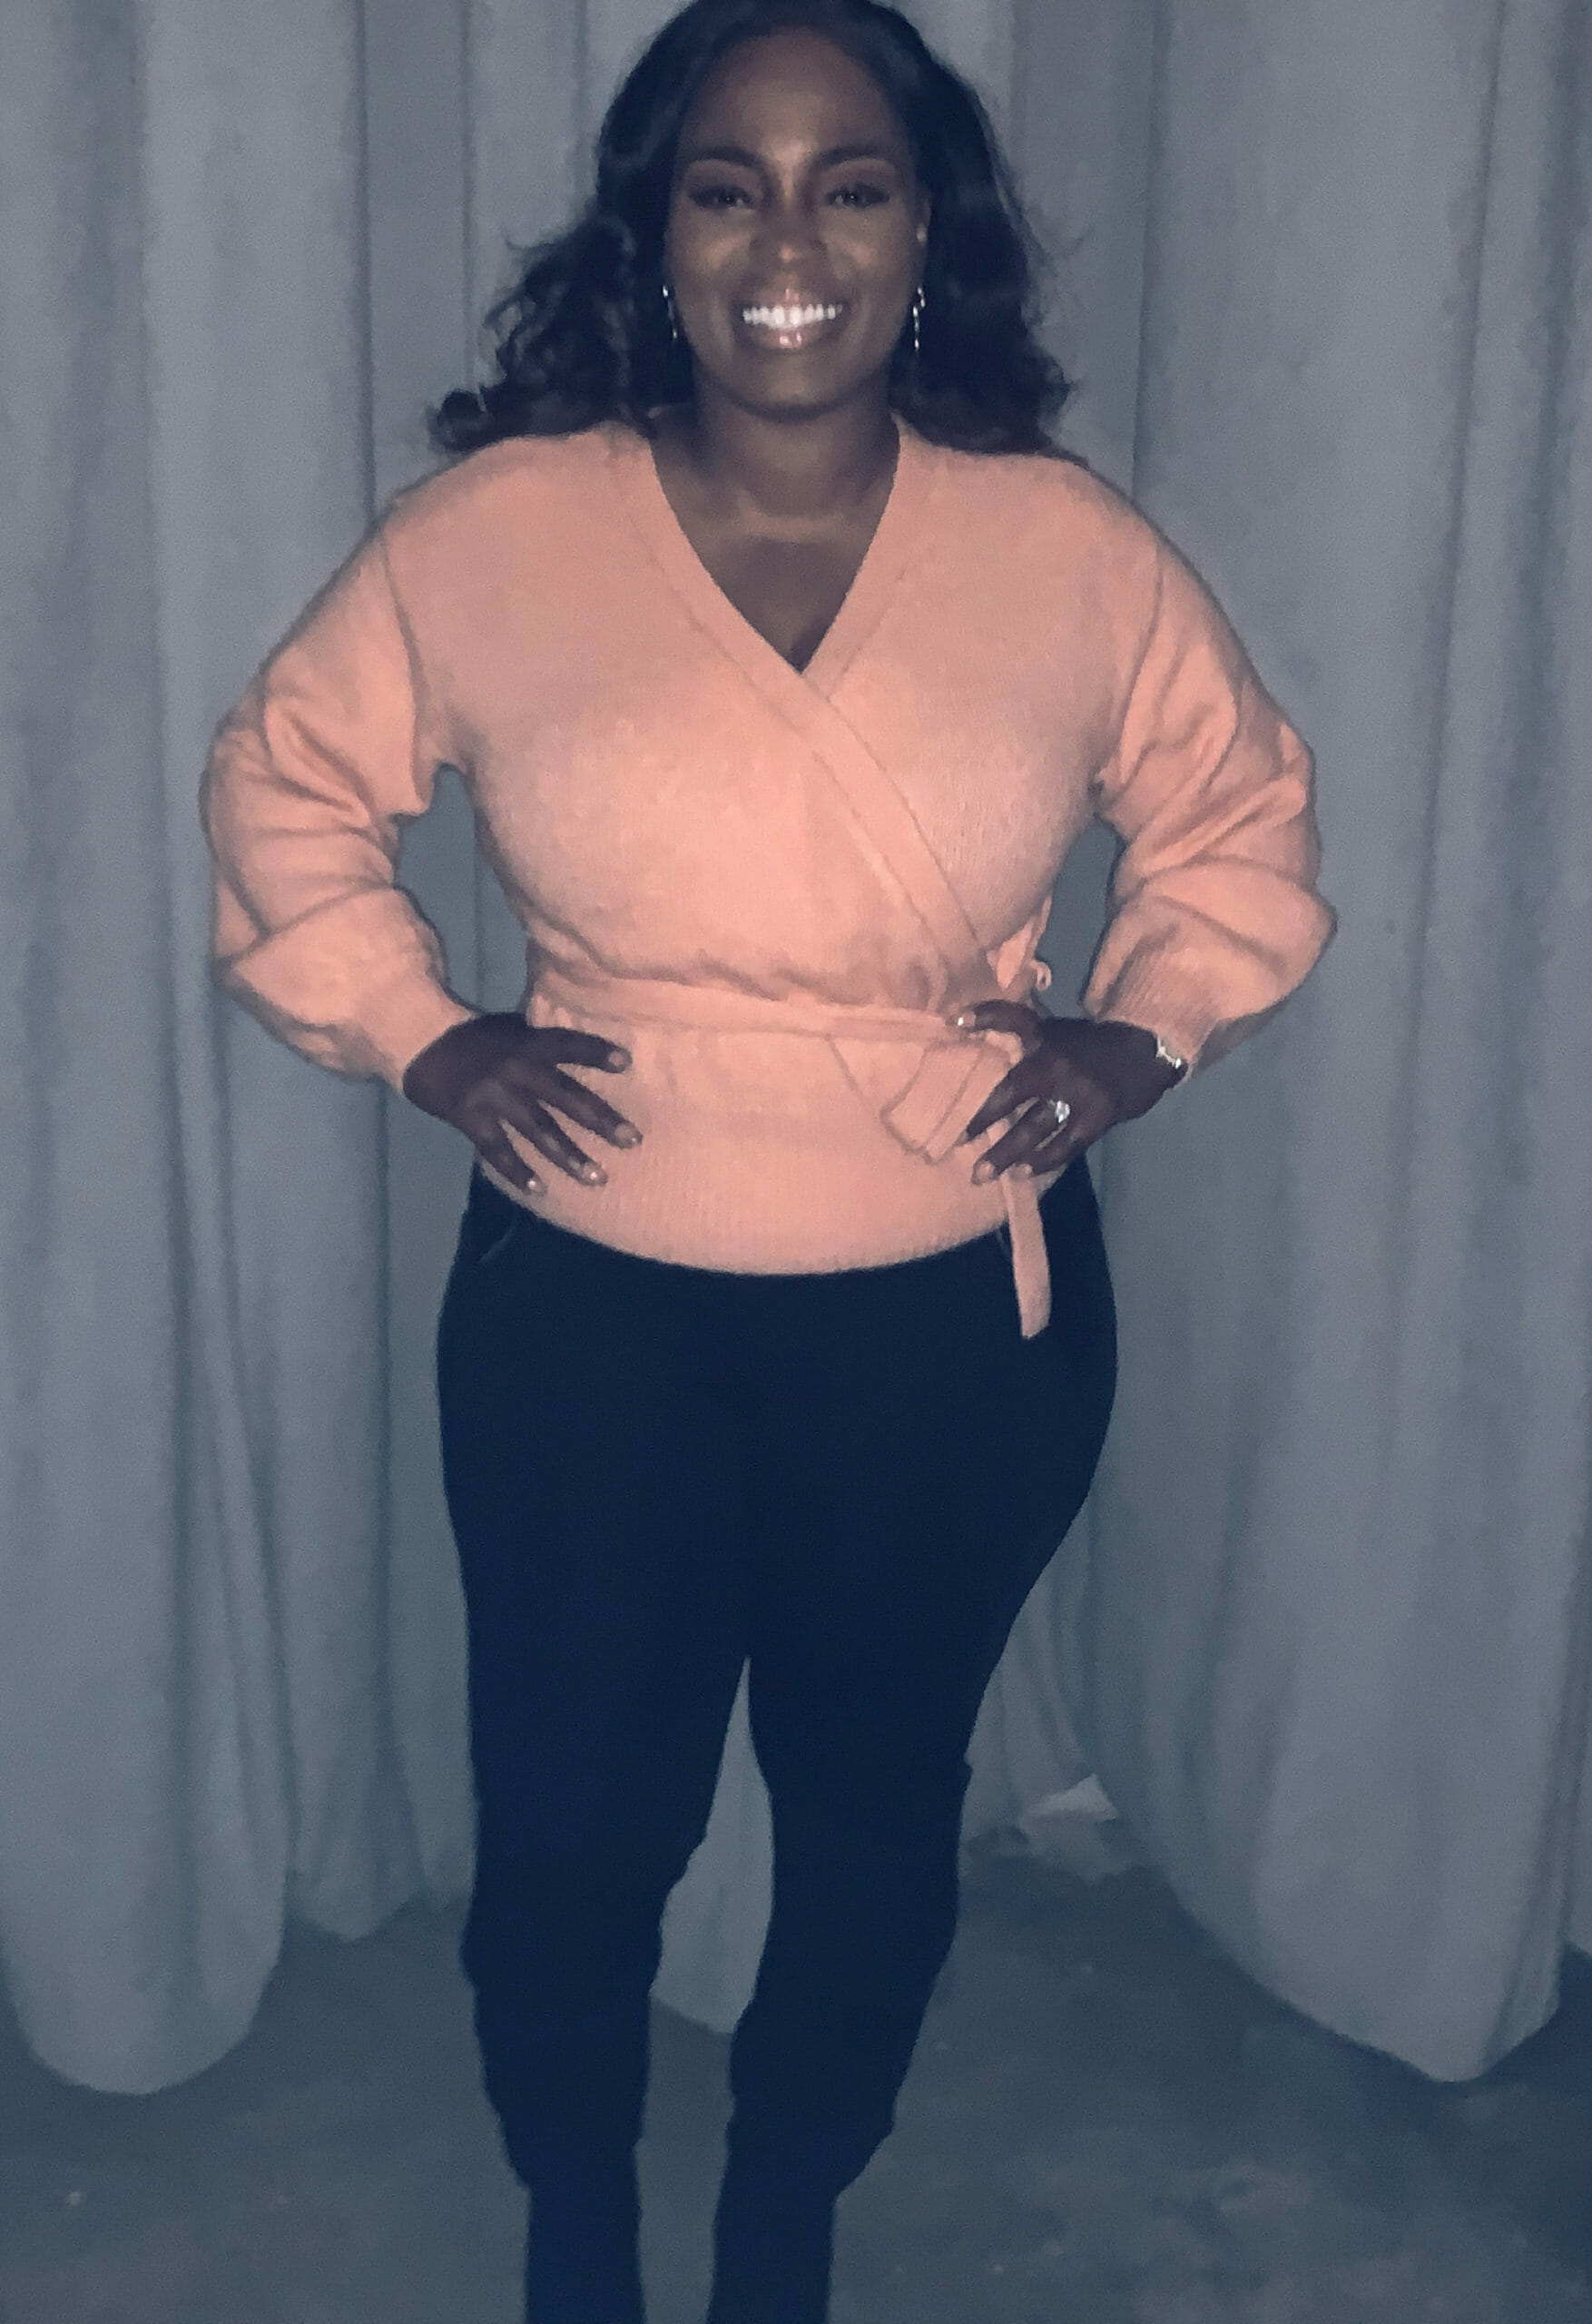 Ashro Woman of the Week ANGELA, a smiling African-American woman wearing a pink top and black slacks.